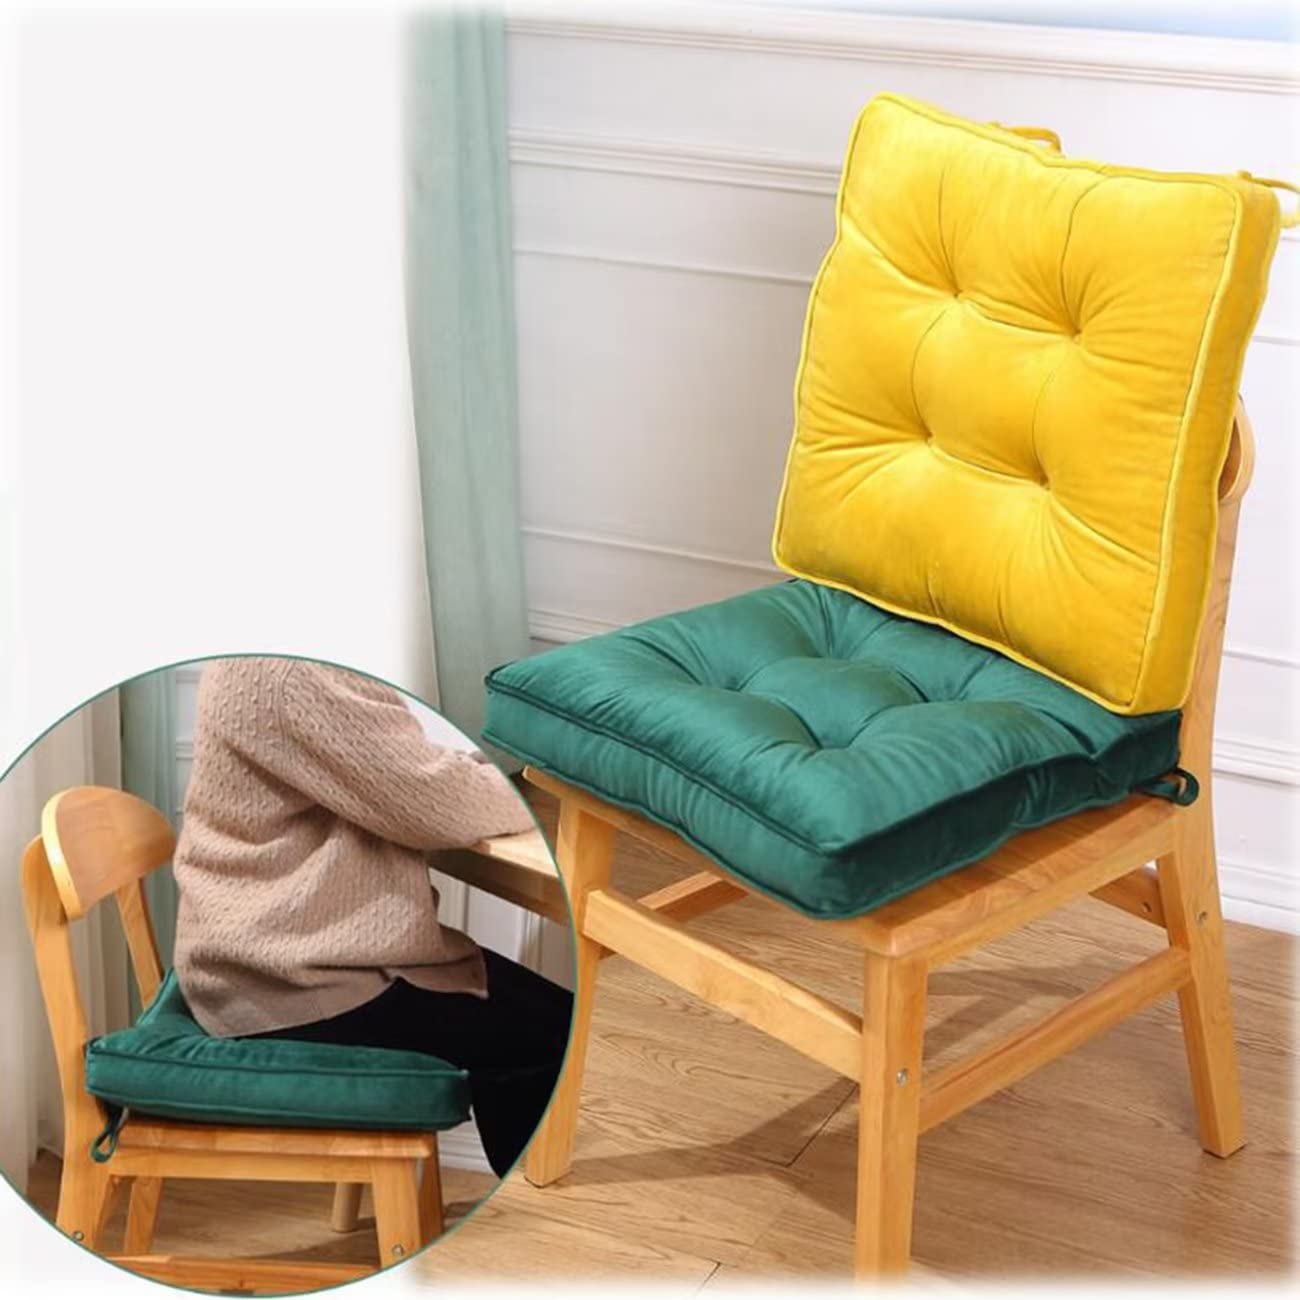 Wadser 2 Pack Velvet Seat Cushions for Dining Chair Square Home Office Chair Pads Soft Floor Pillows Tatami Yoga Meditation Pads, Gold, 15.7x15.7x2.4